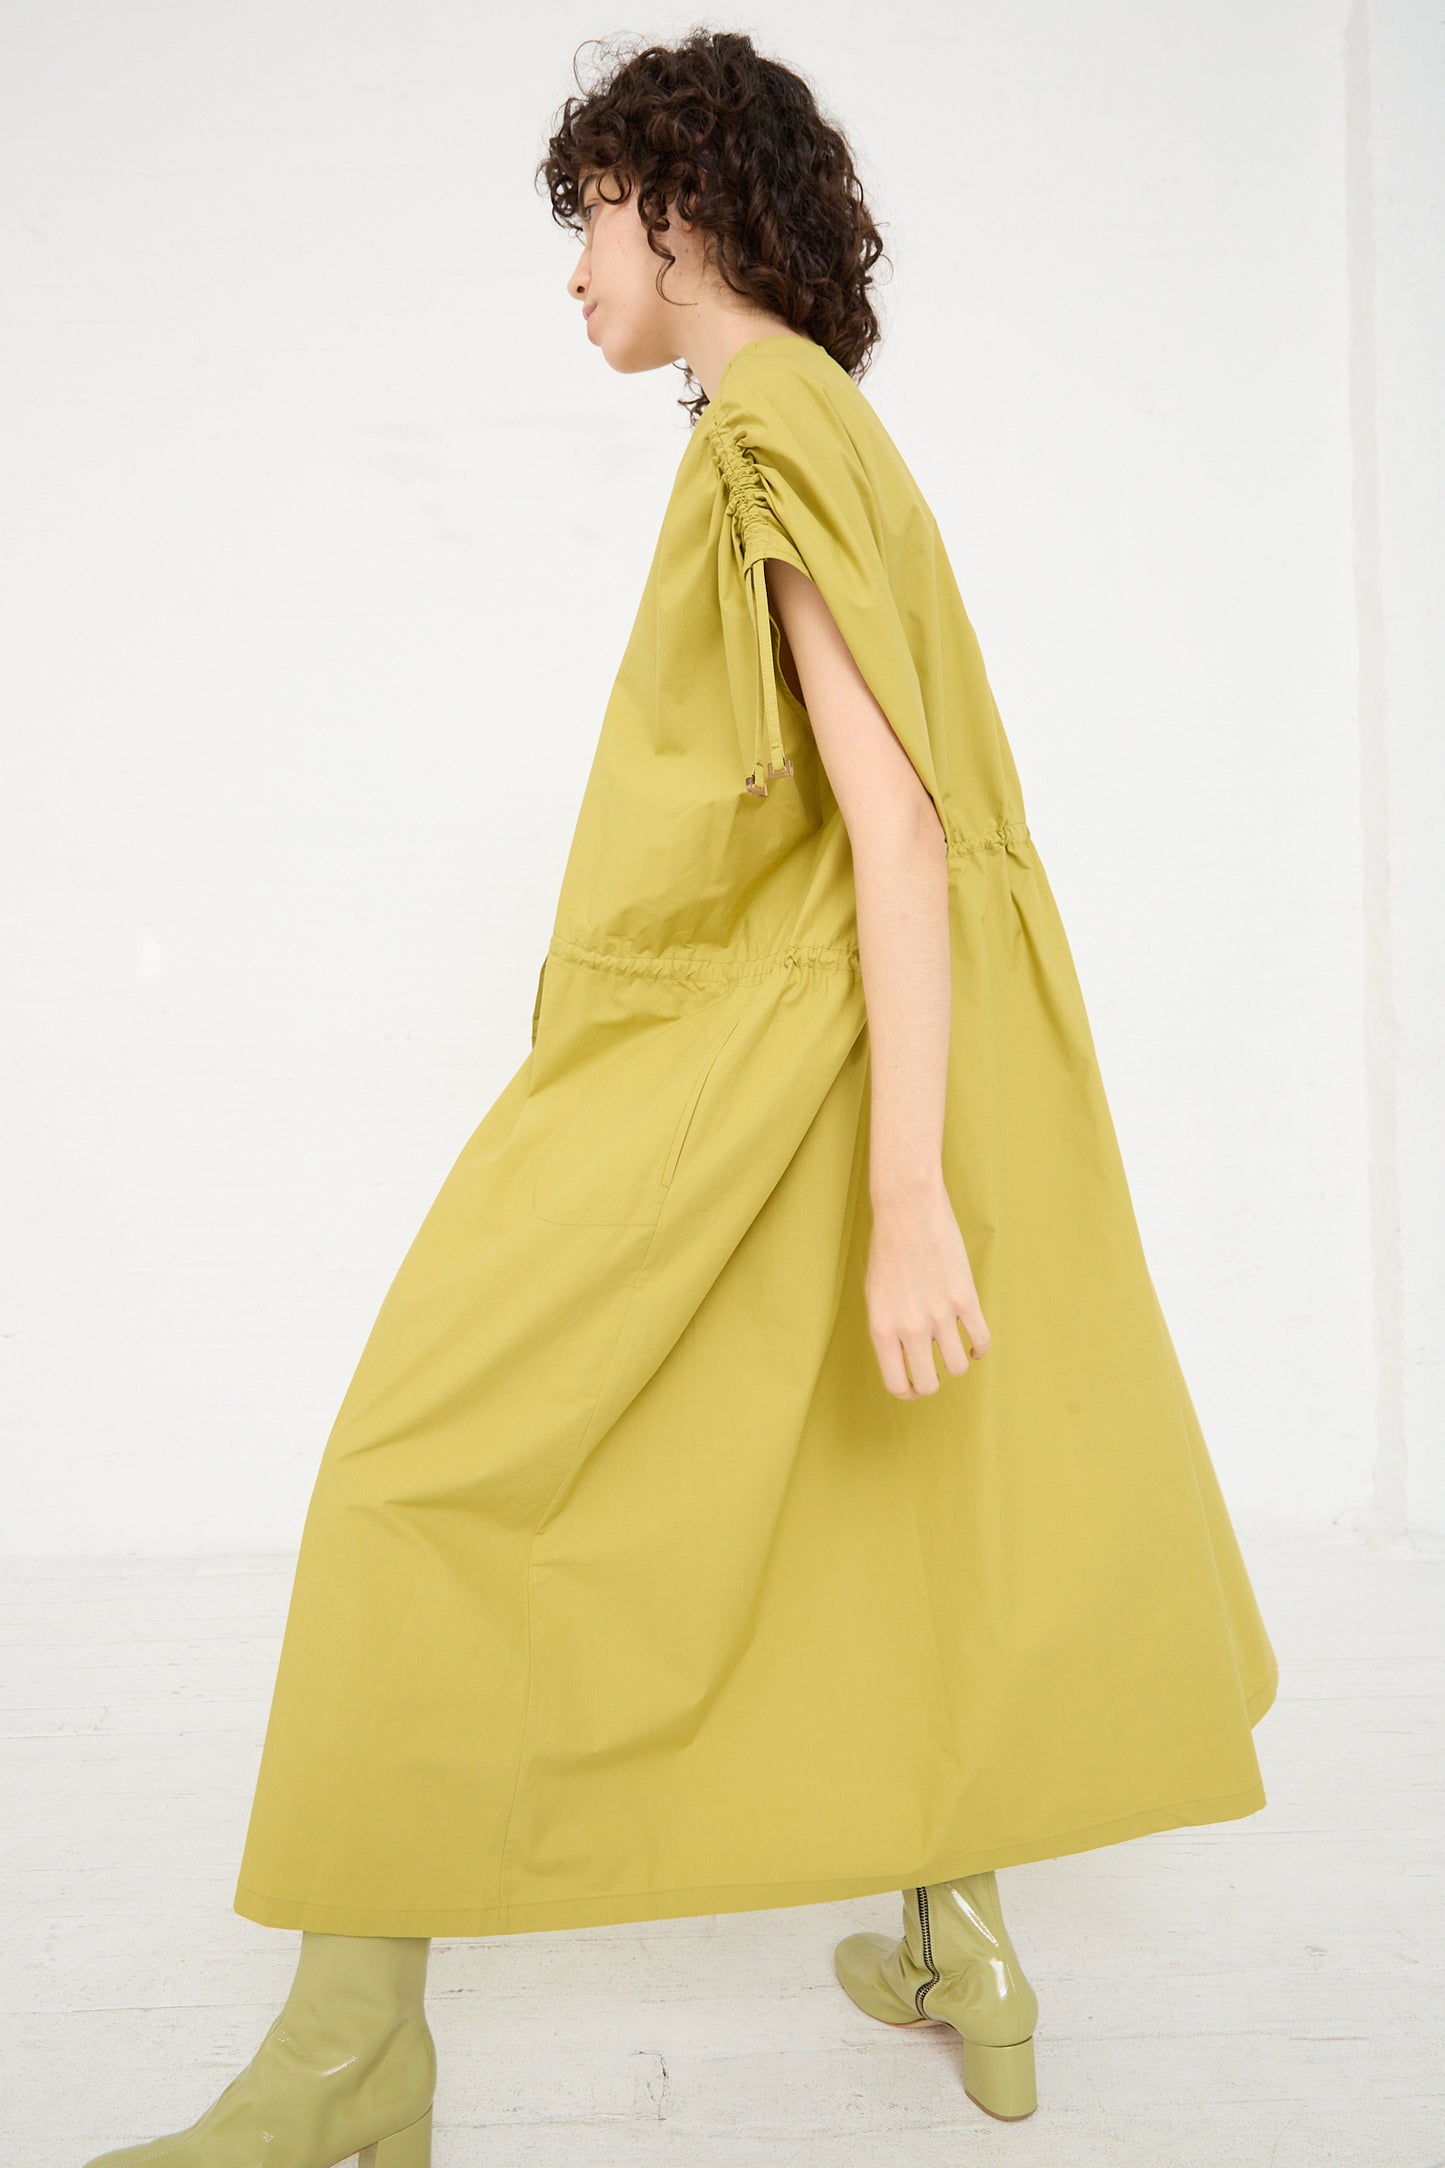 A woman wearing a yellow Cotton Poplin Gathered Dress in Matcha by Veronique Leroy and green boots. Side profile.